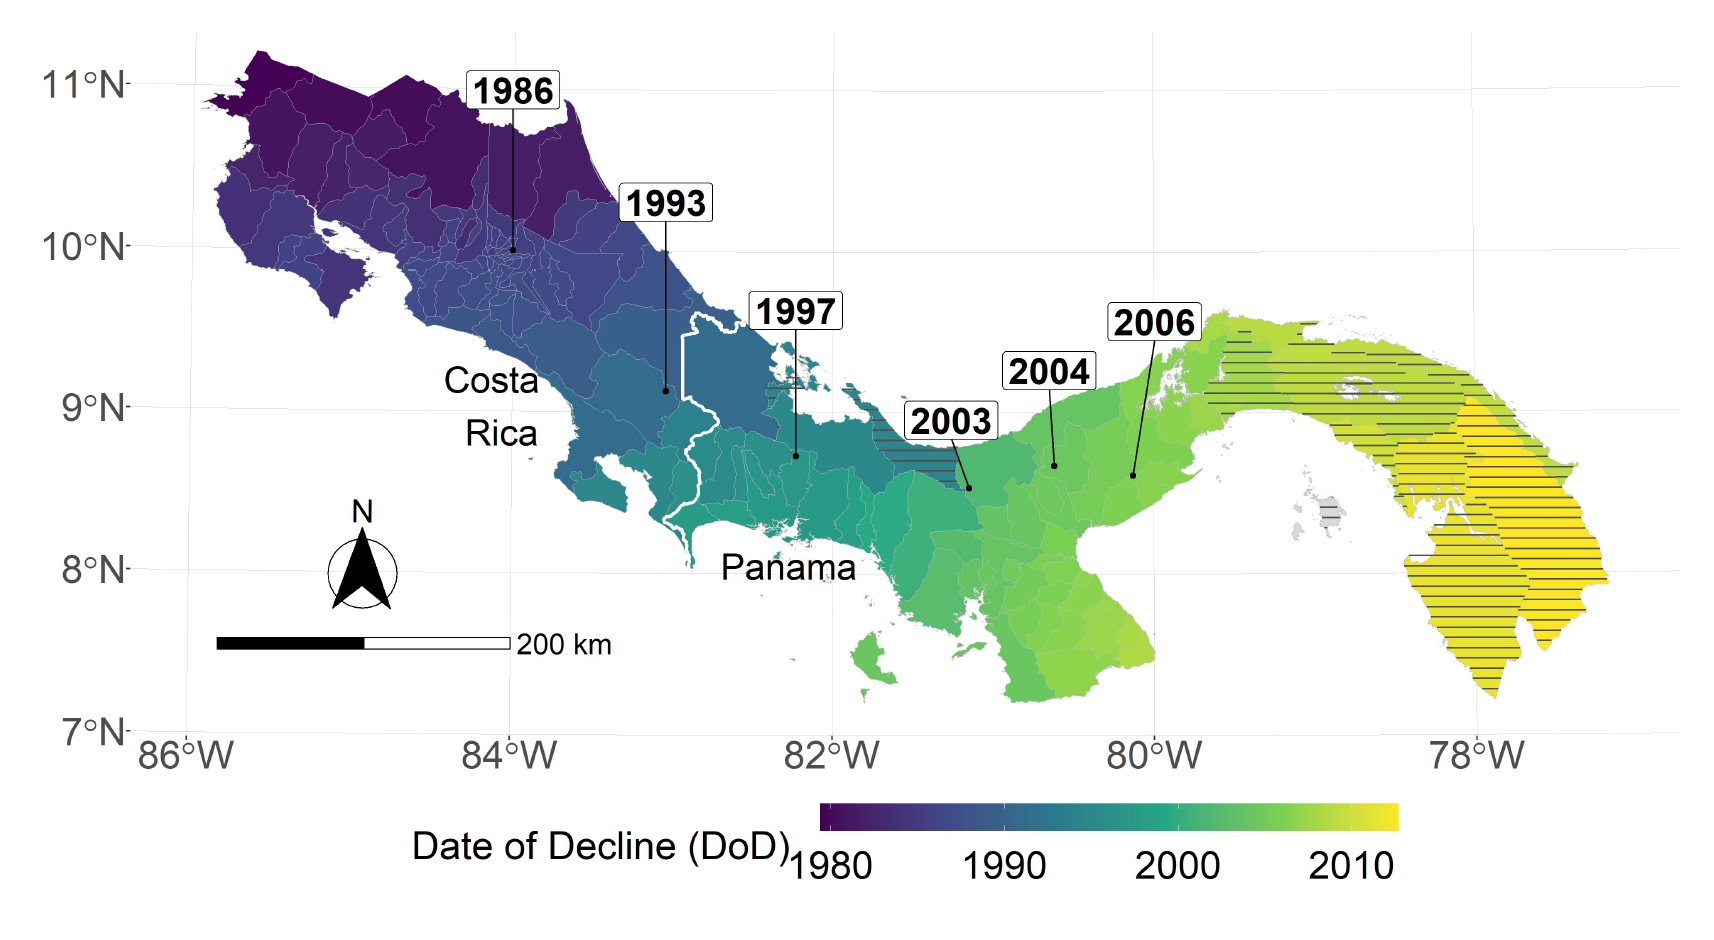 Purple, green and yellow map of Panama and Costa Rica representing malaria cases and amphibian die-offs